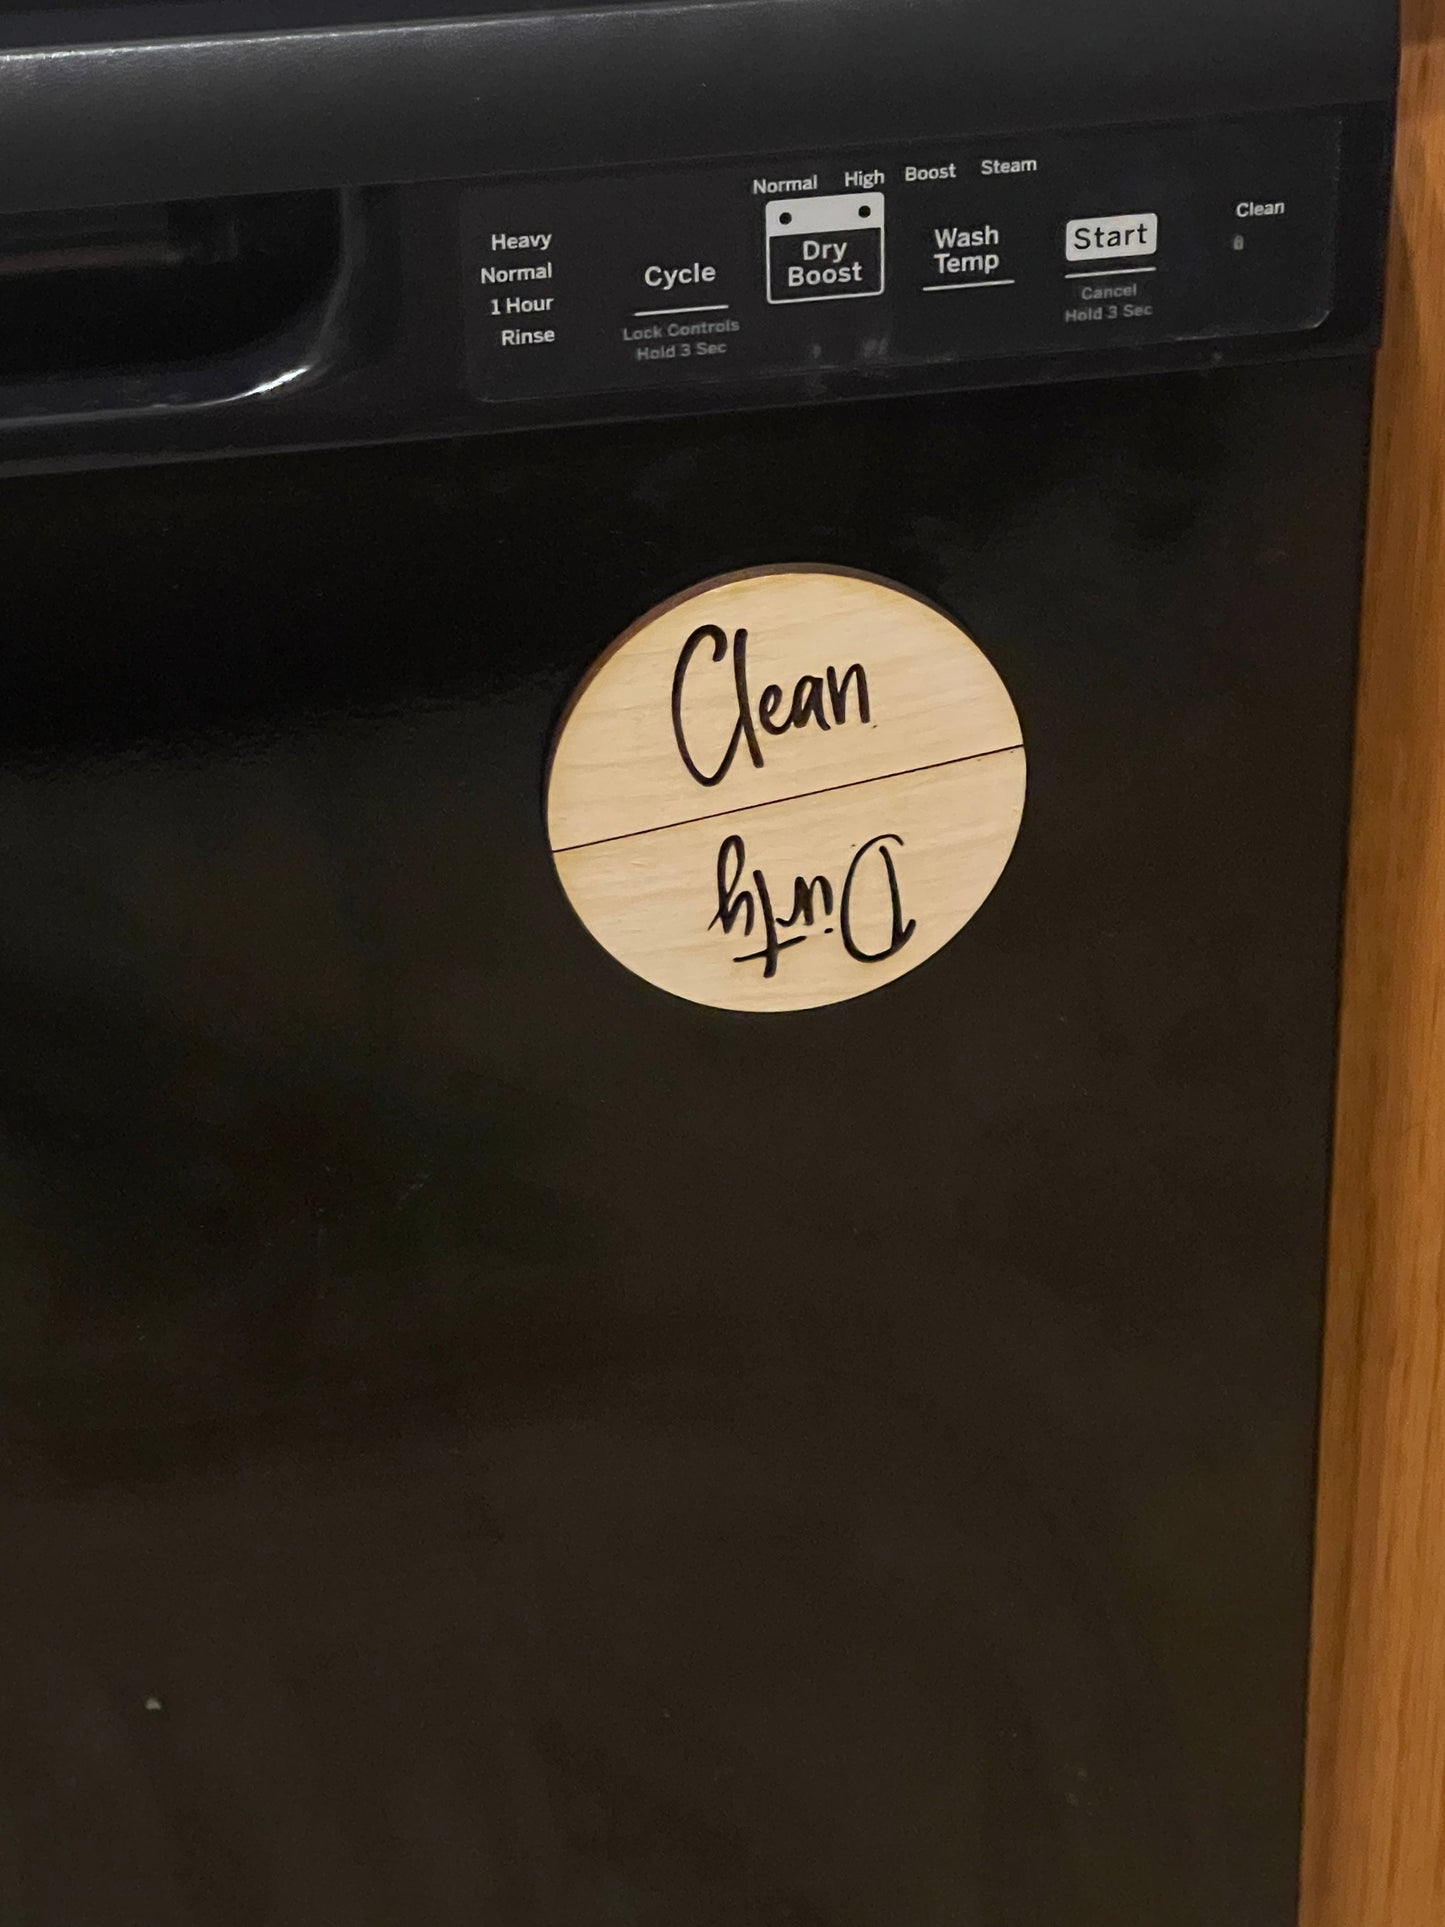 Clean/Dirty (dishwasher magnet)